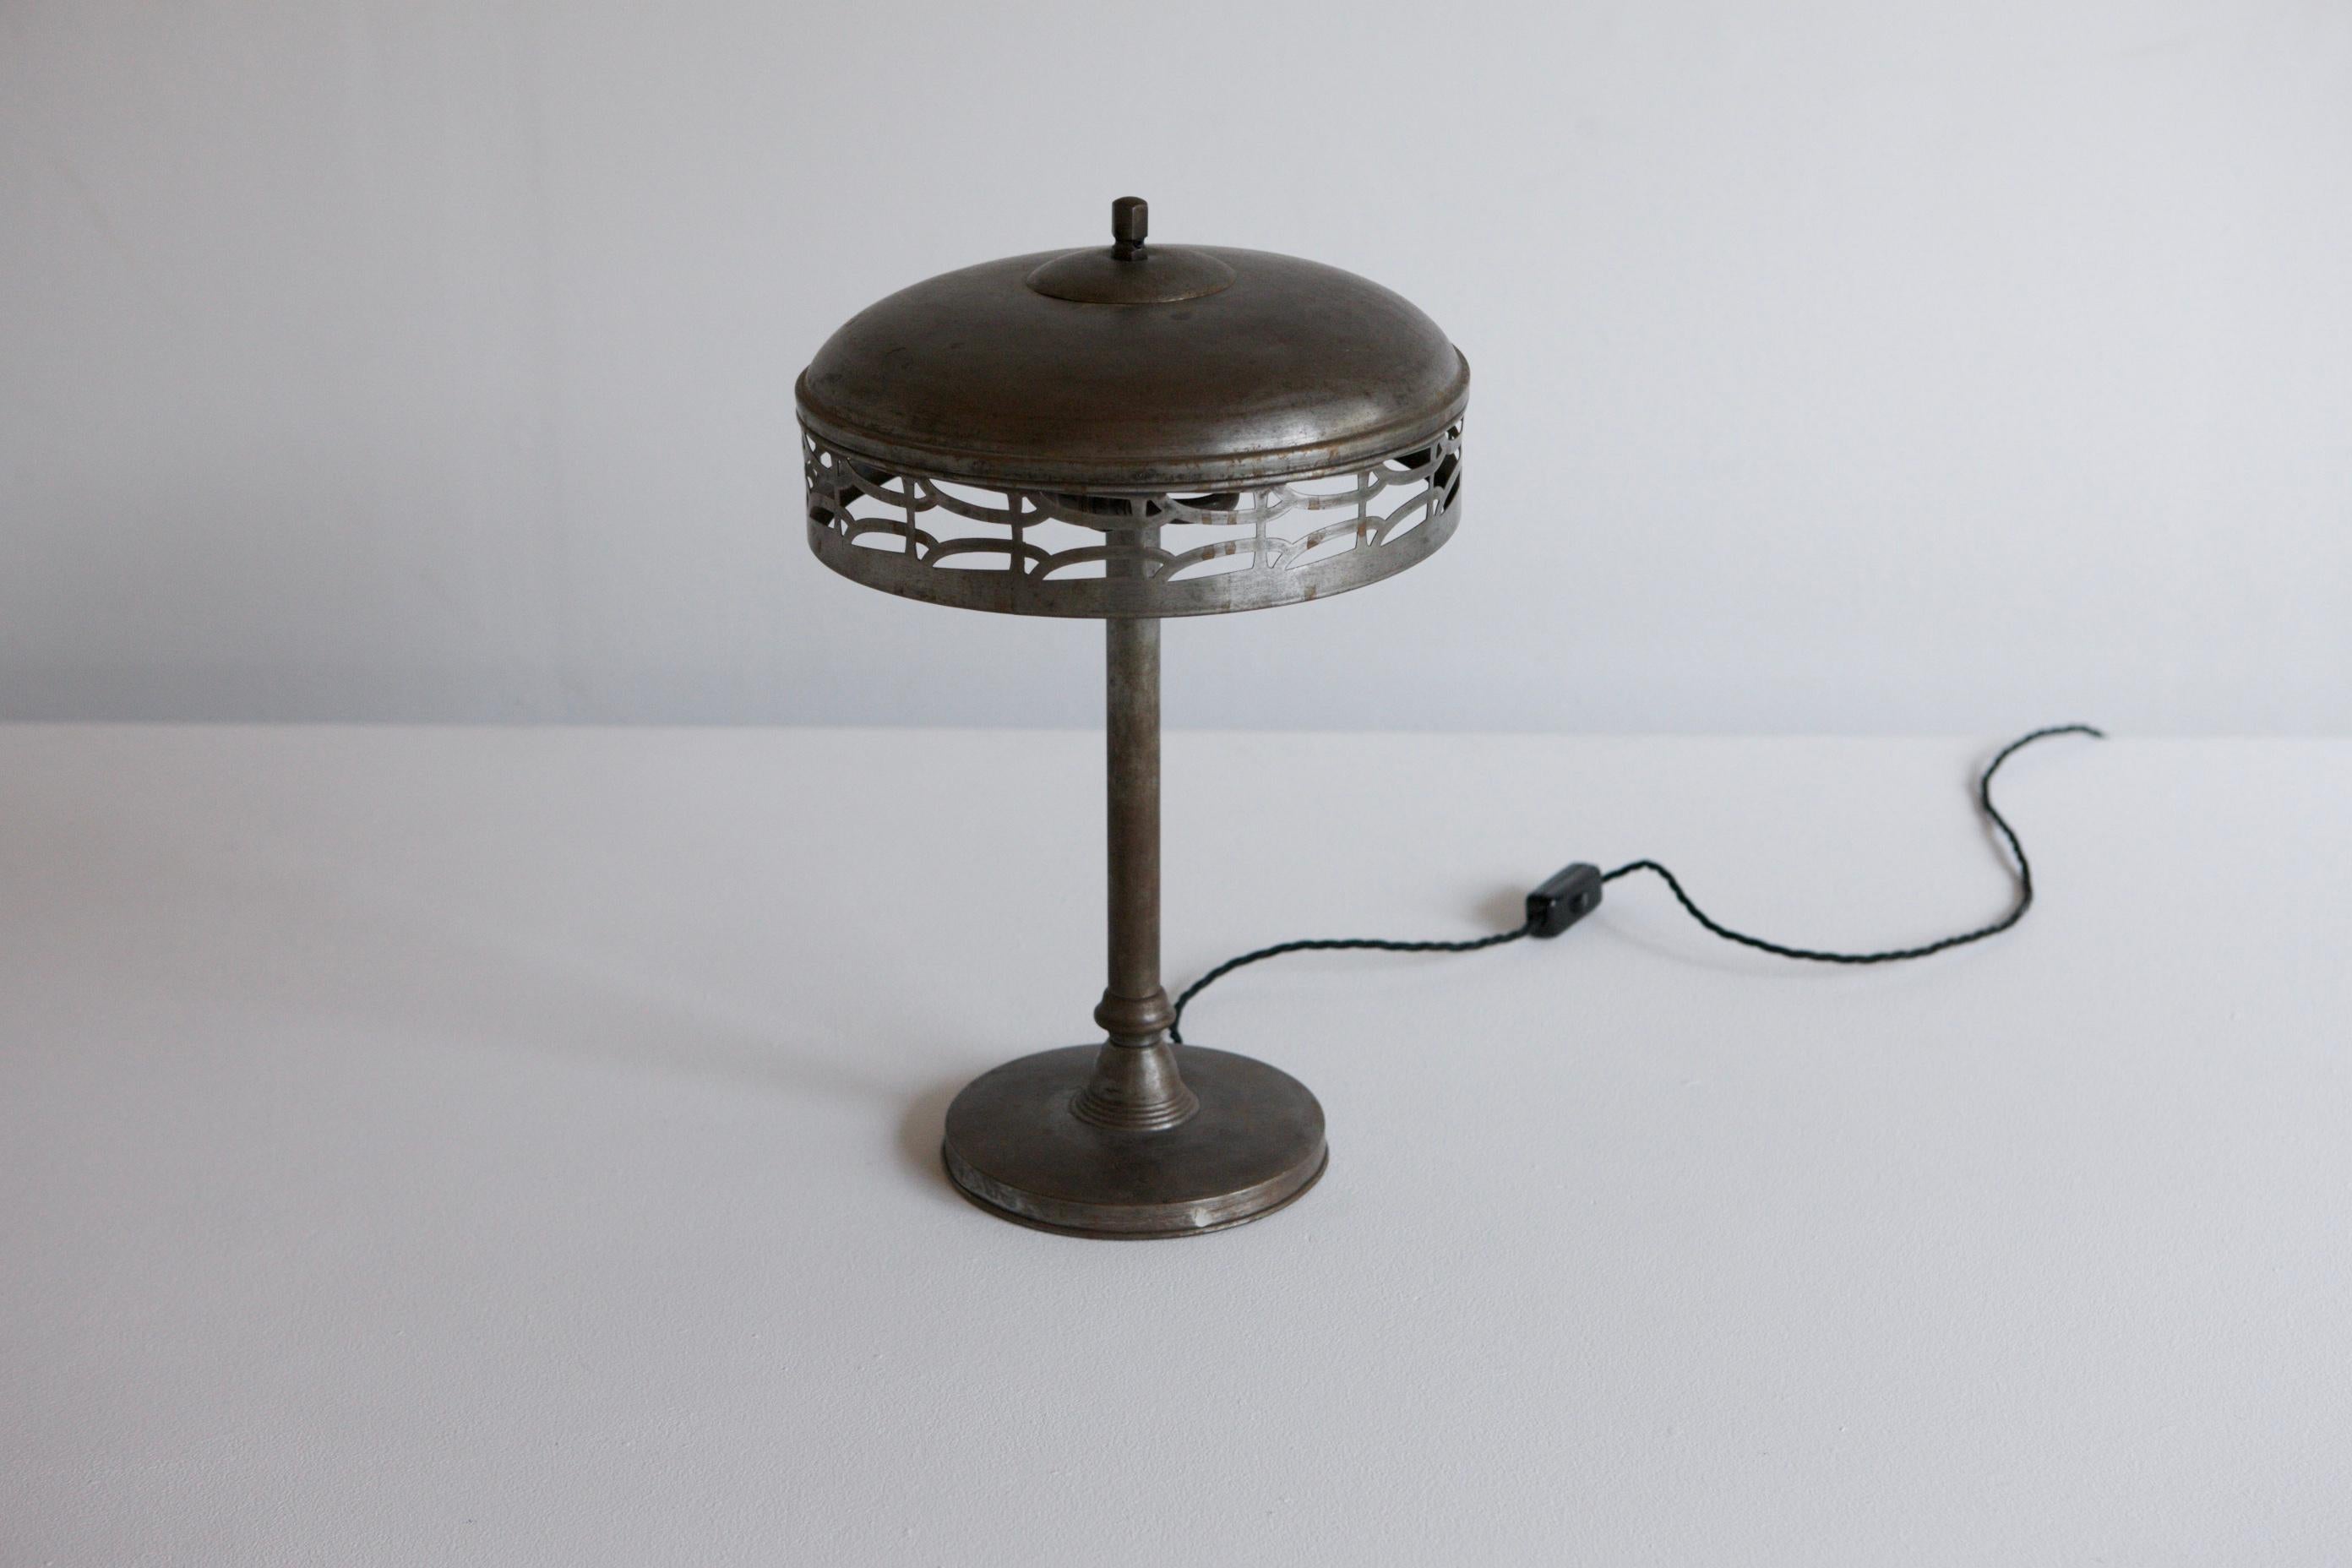 A Venetian style table lamp from early 20th century europe, restored sympathetically. Reminicent of the work of Adolf Loo's.